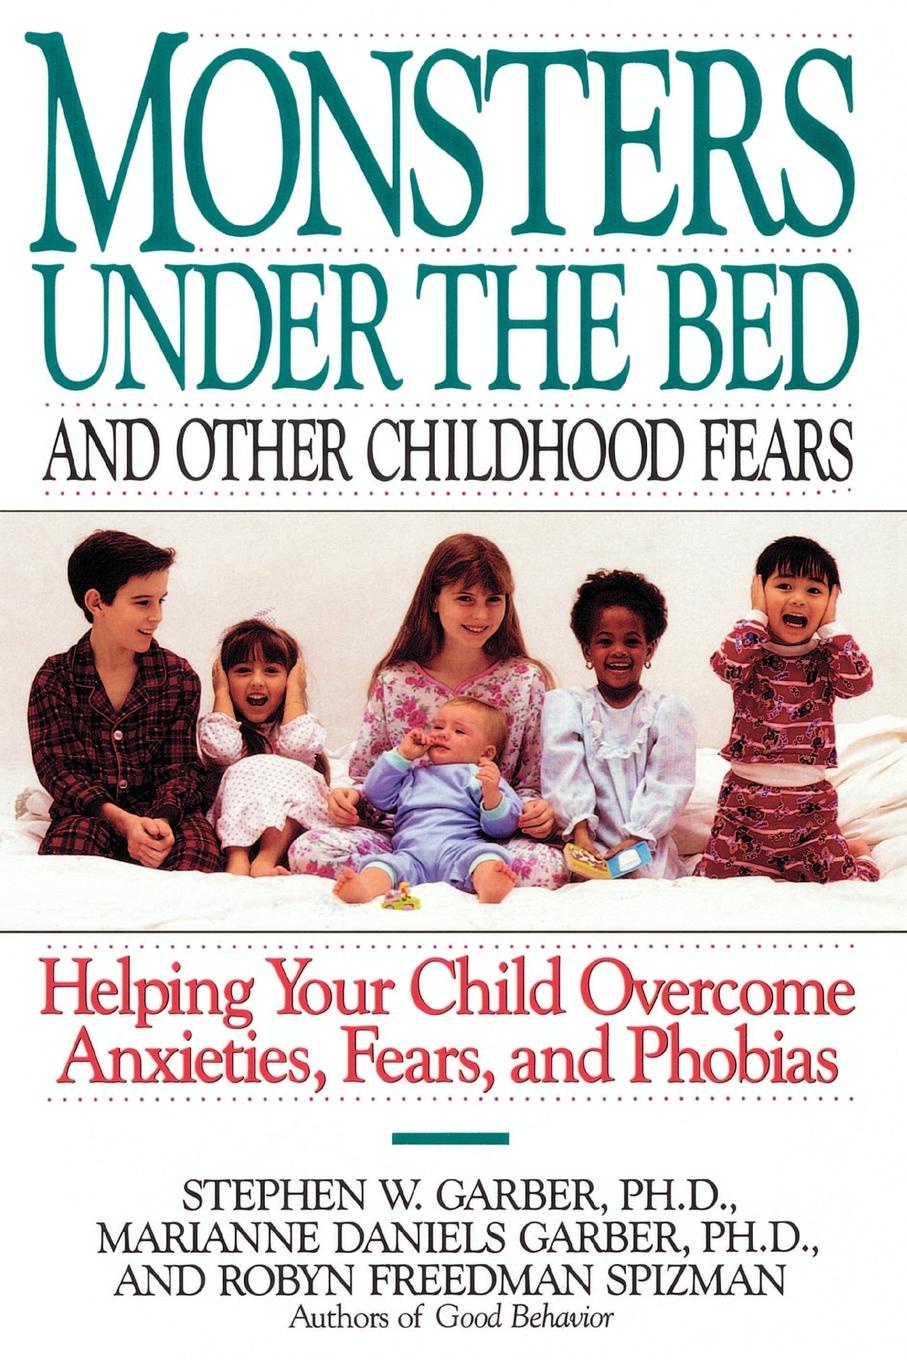 Monsters Under the Bed and Other Childhood Fears. Helping Your Child Overcome Anxieties, Fears, and Phobias